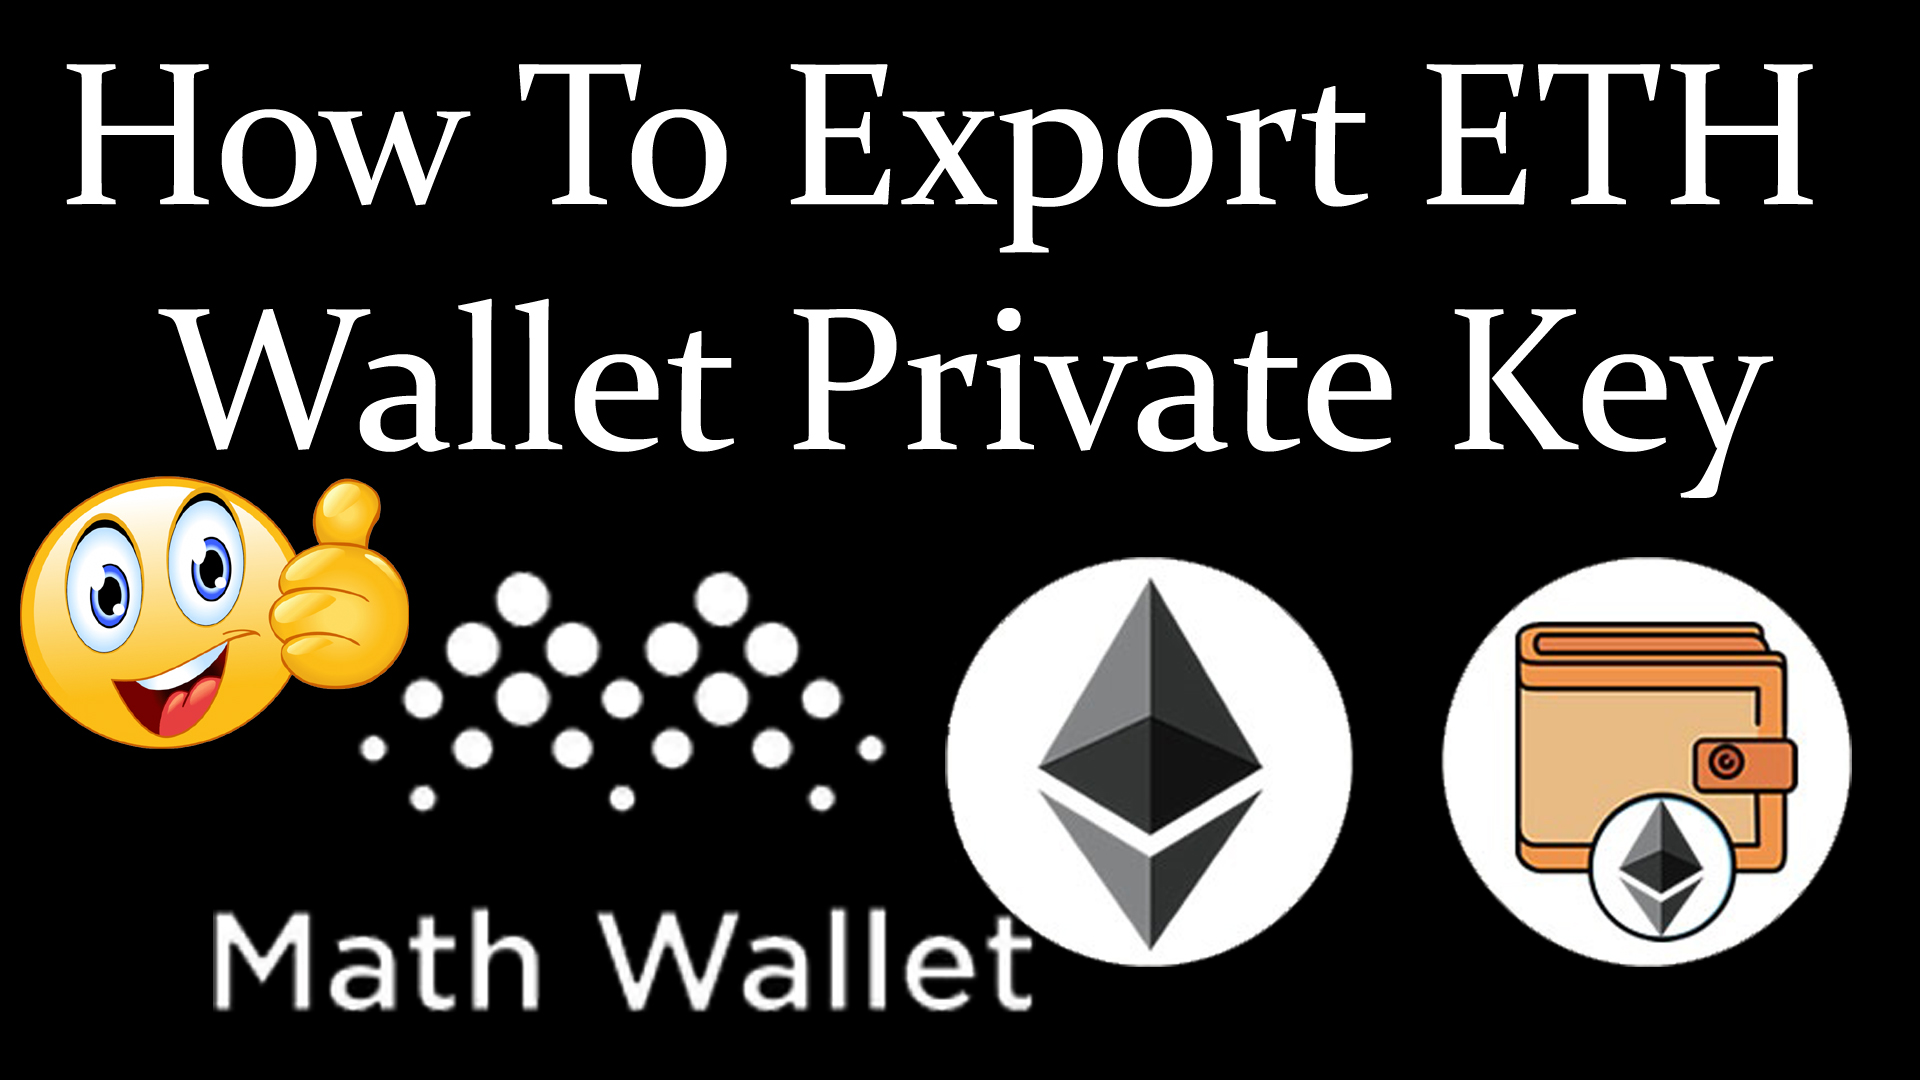 How To Export ETH Wallet Private Key by Crypto Wallets Info.jpg